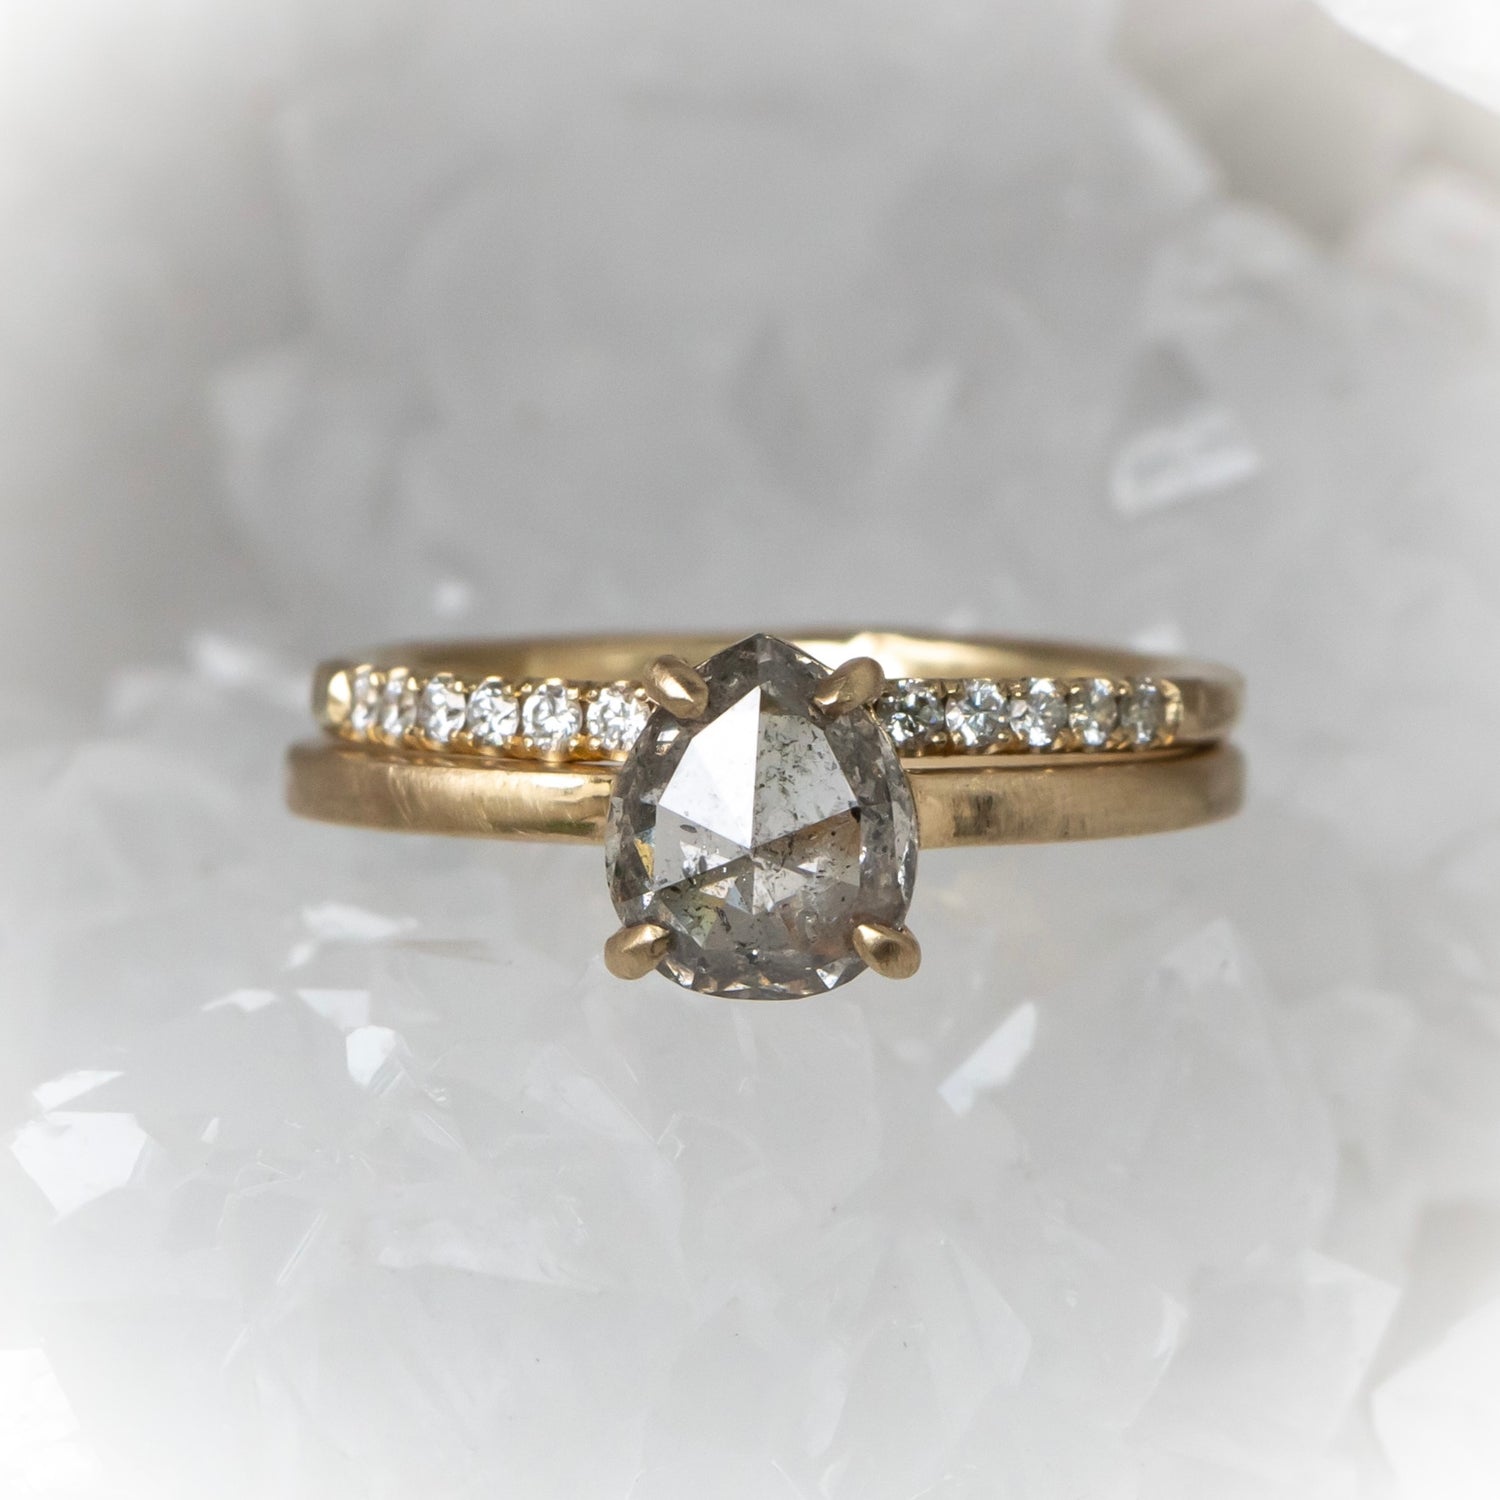 Ready to to ship: Salt and Pepper Pear Diamond Ring - Salt and Pepper Diamond Ring- mossNstone